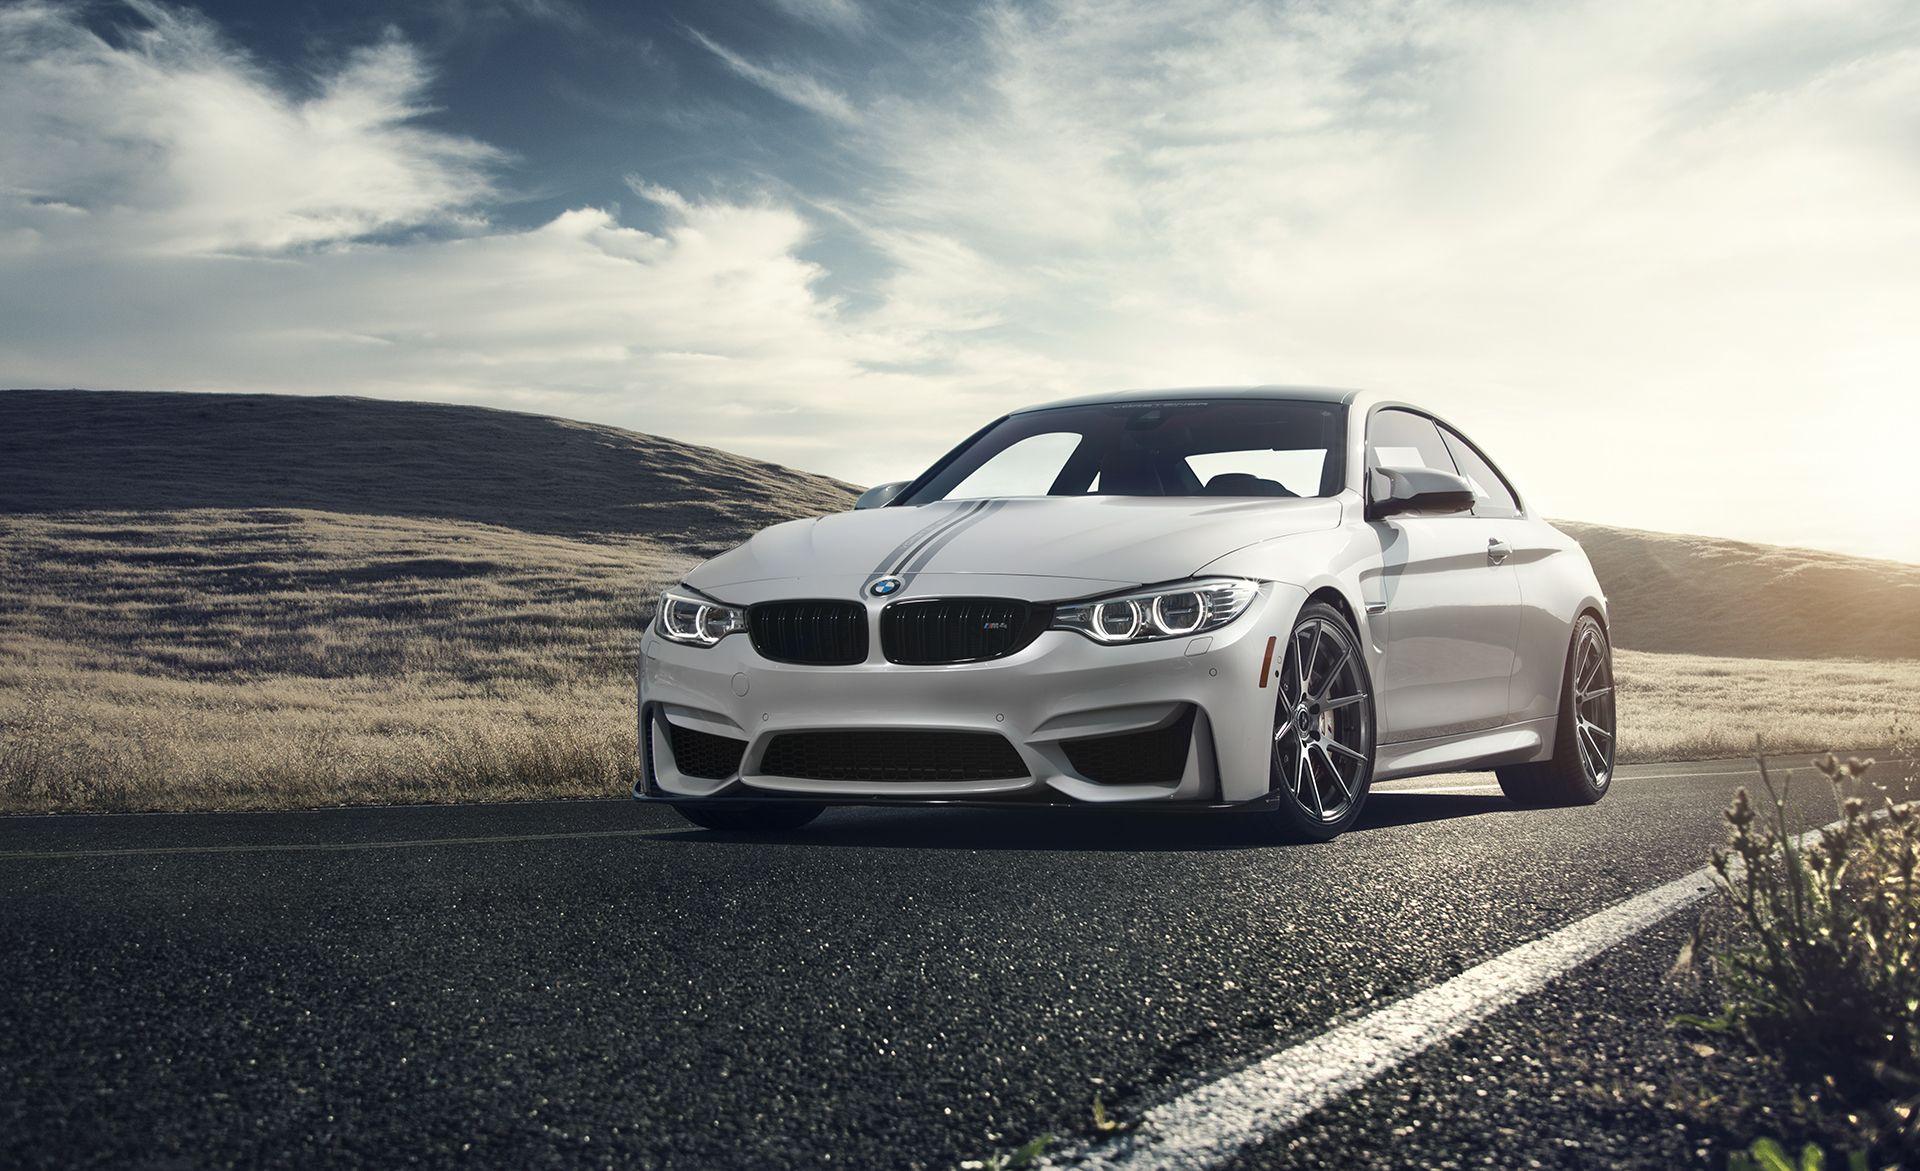 BMW M4 Wallpaper, Picture, Image